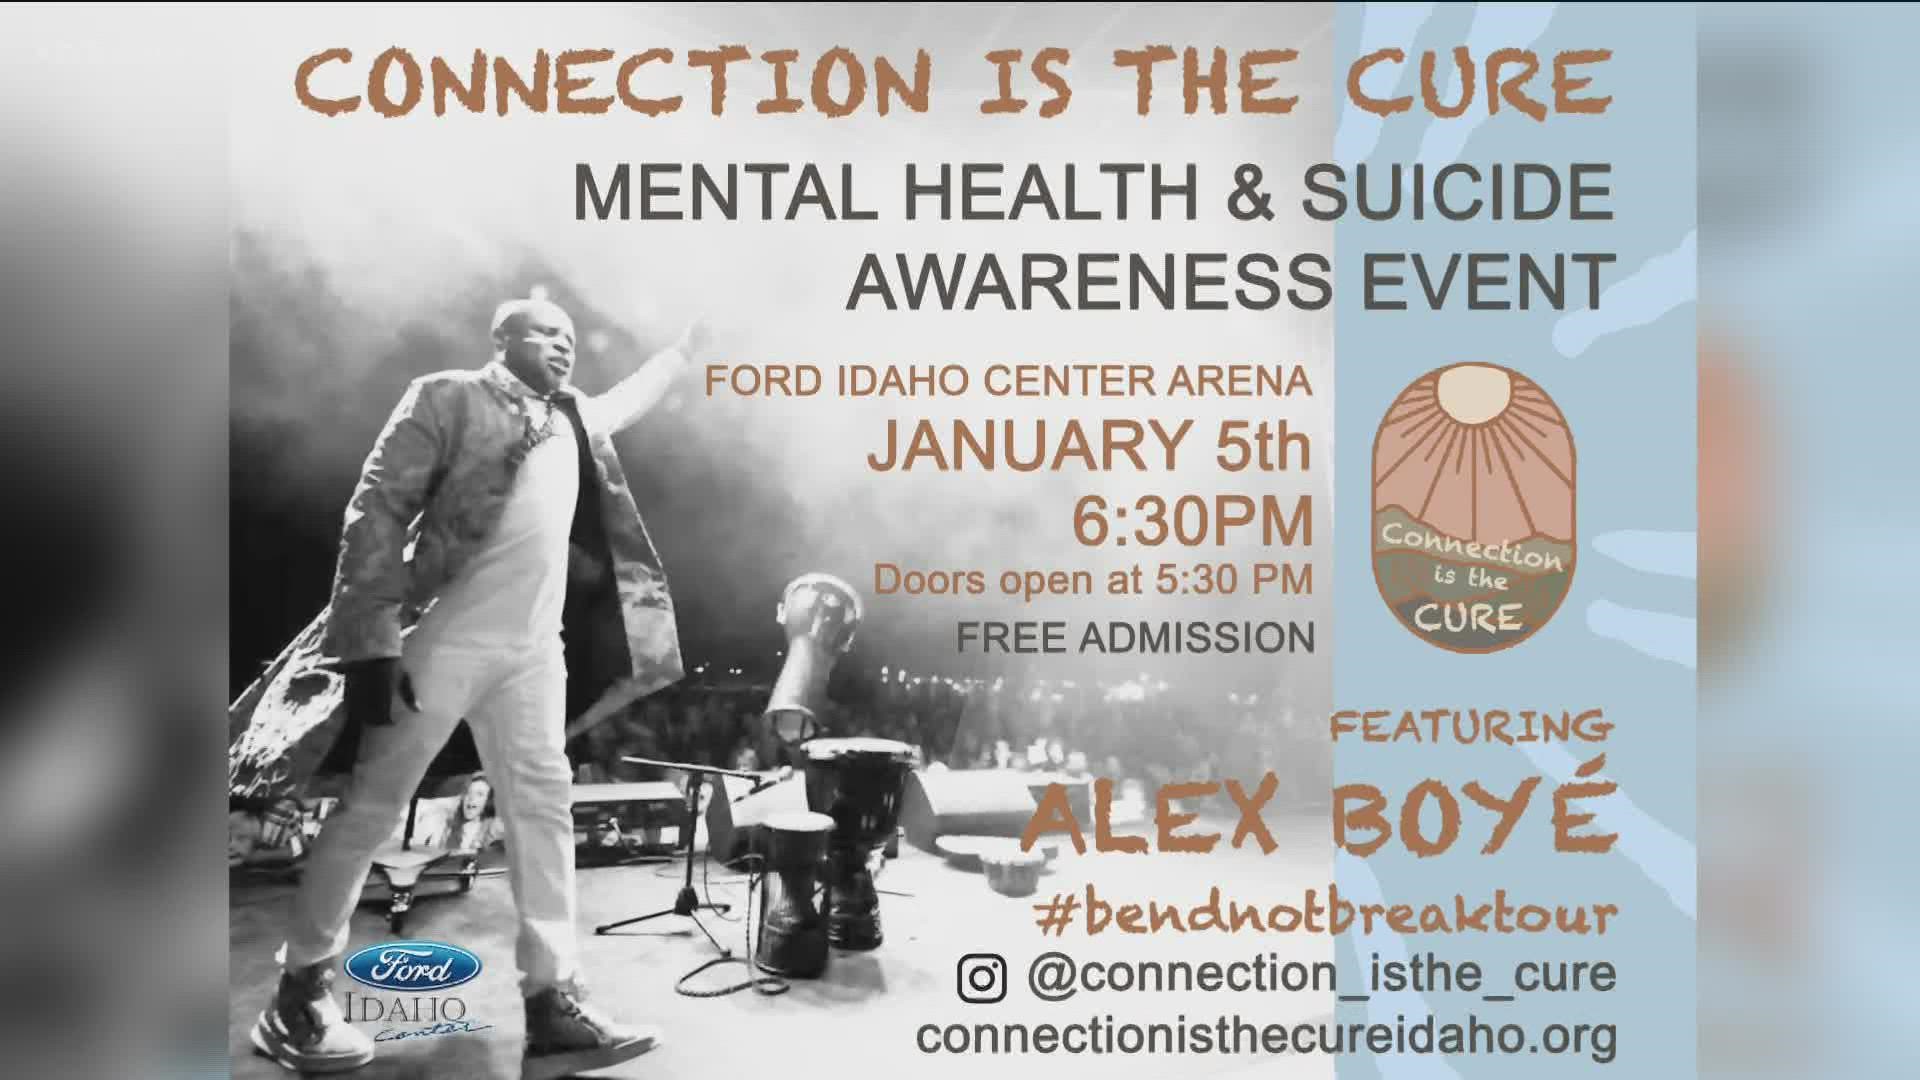 September Frogley, the founder of Connection is the Cure, organized a FREE event at the Idaho Center on January 5th to promote better mental health.